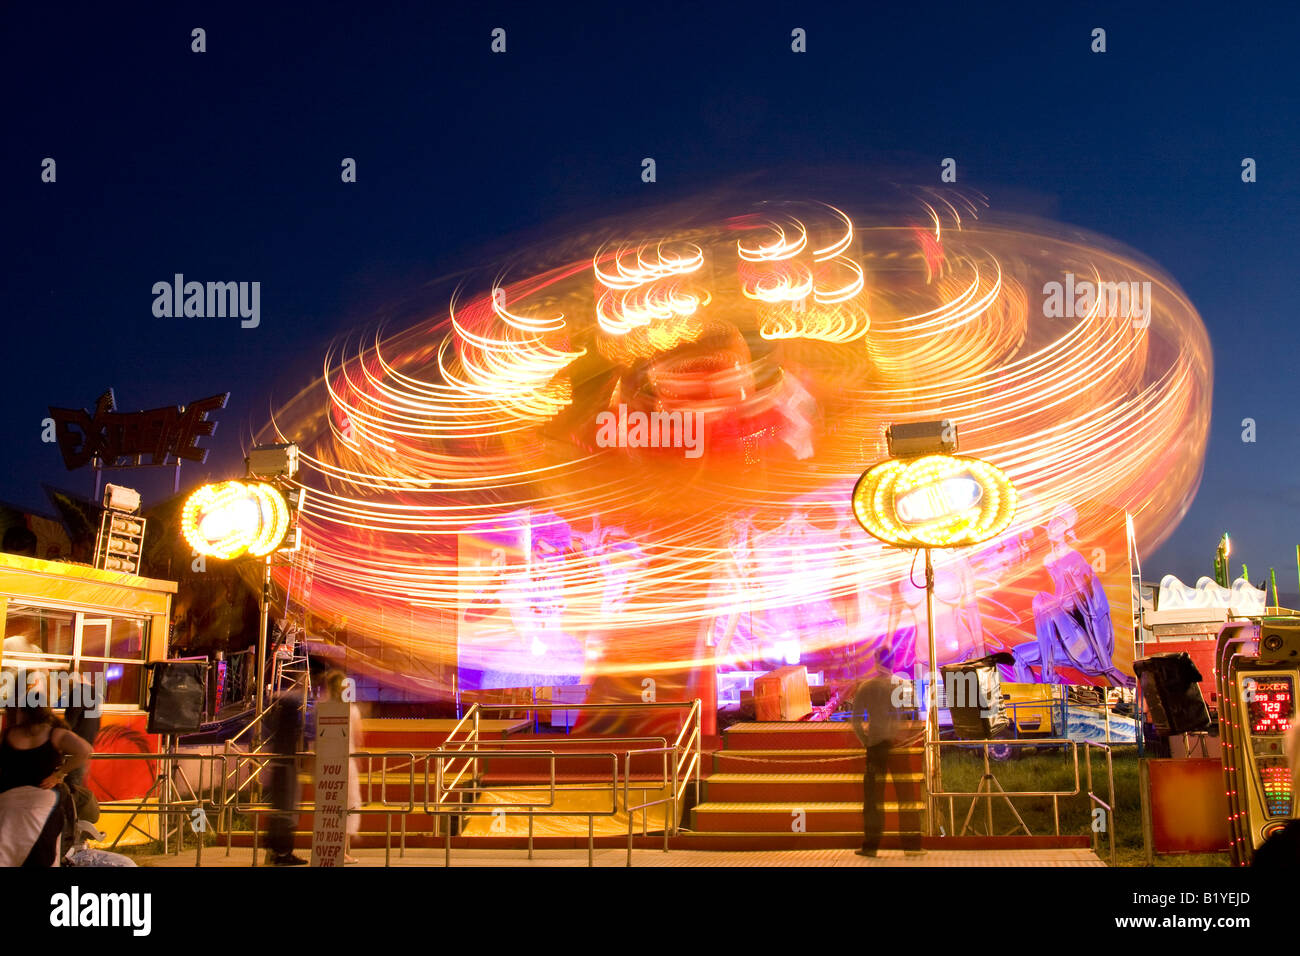 A fairground ride night shot at the Hoppings fair on the town moor newcastle Stock Photo